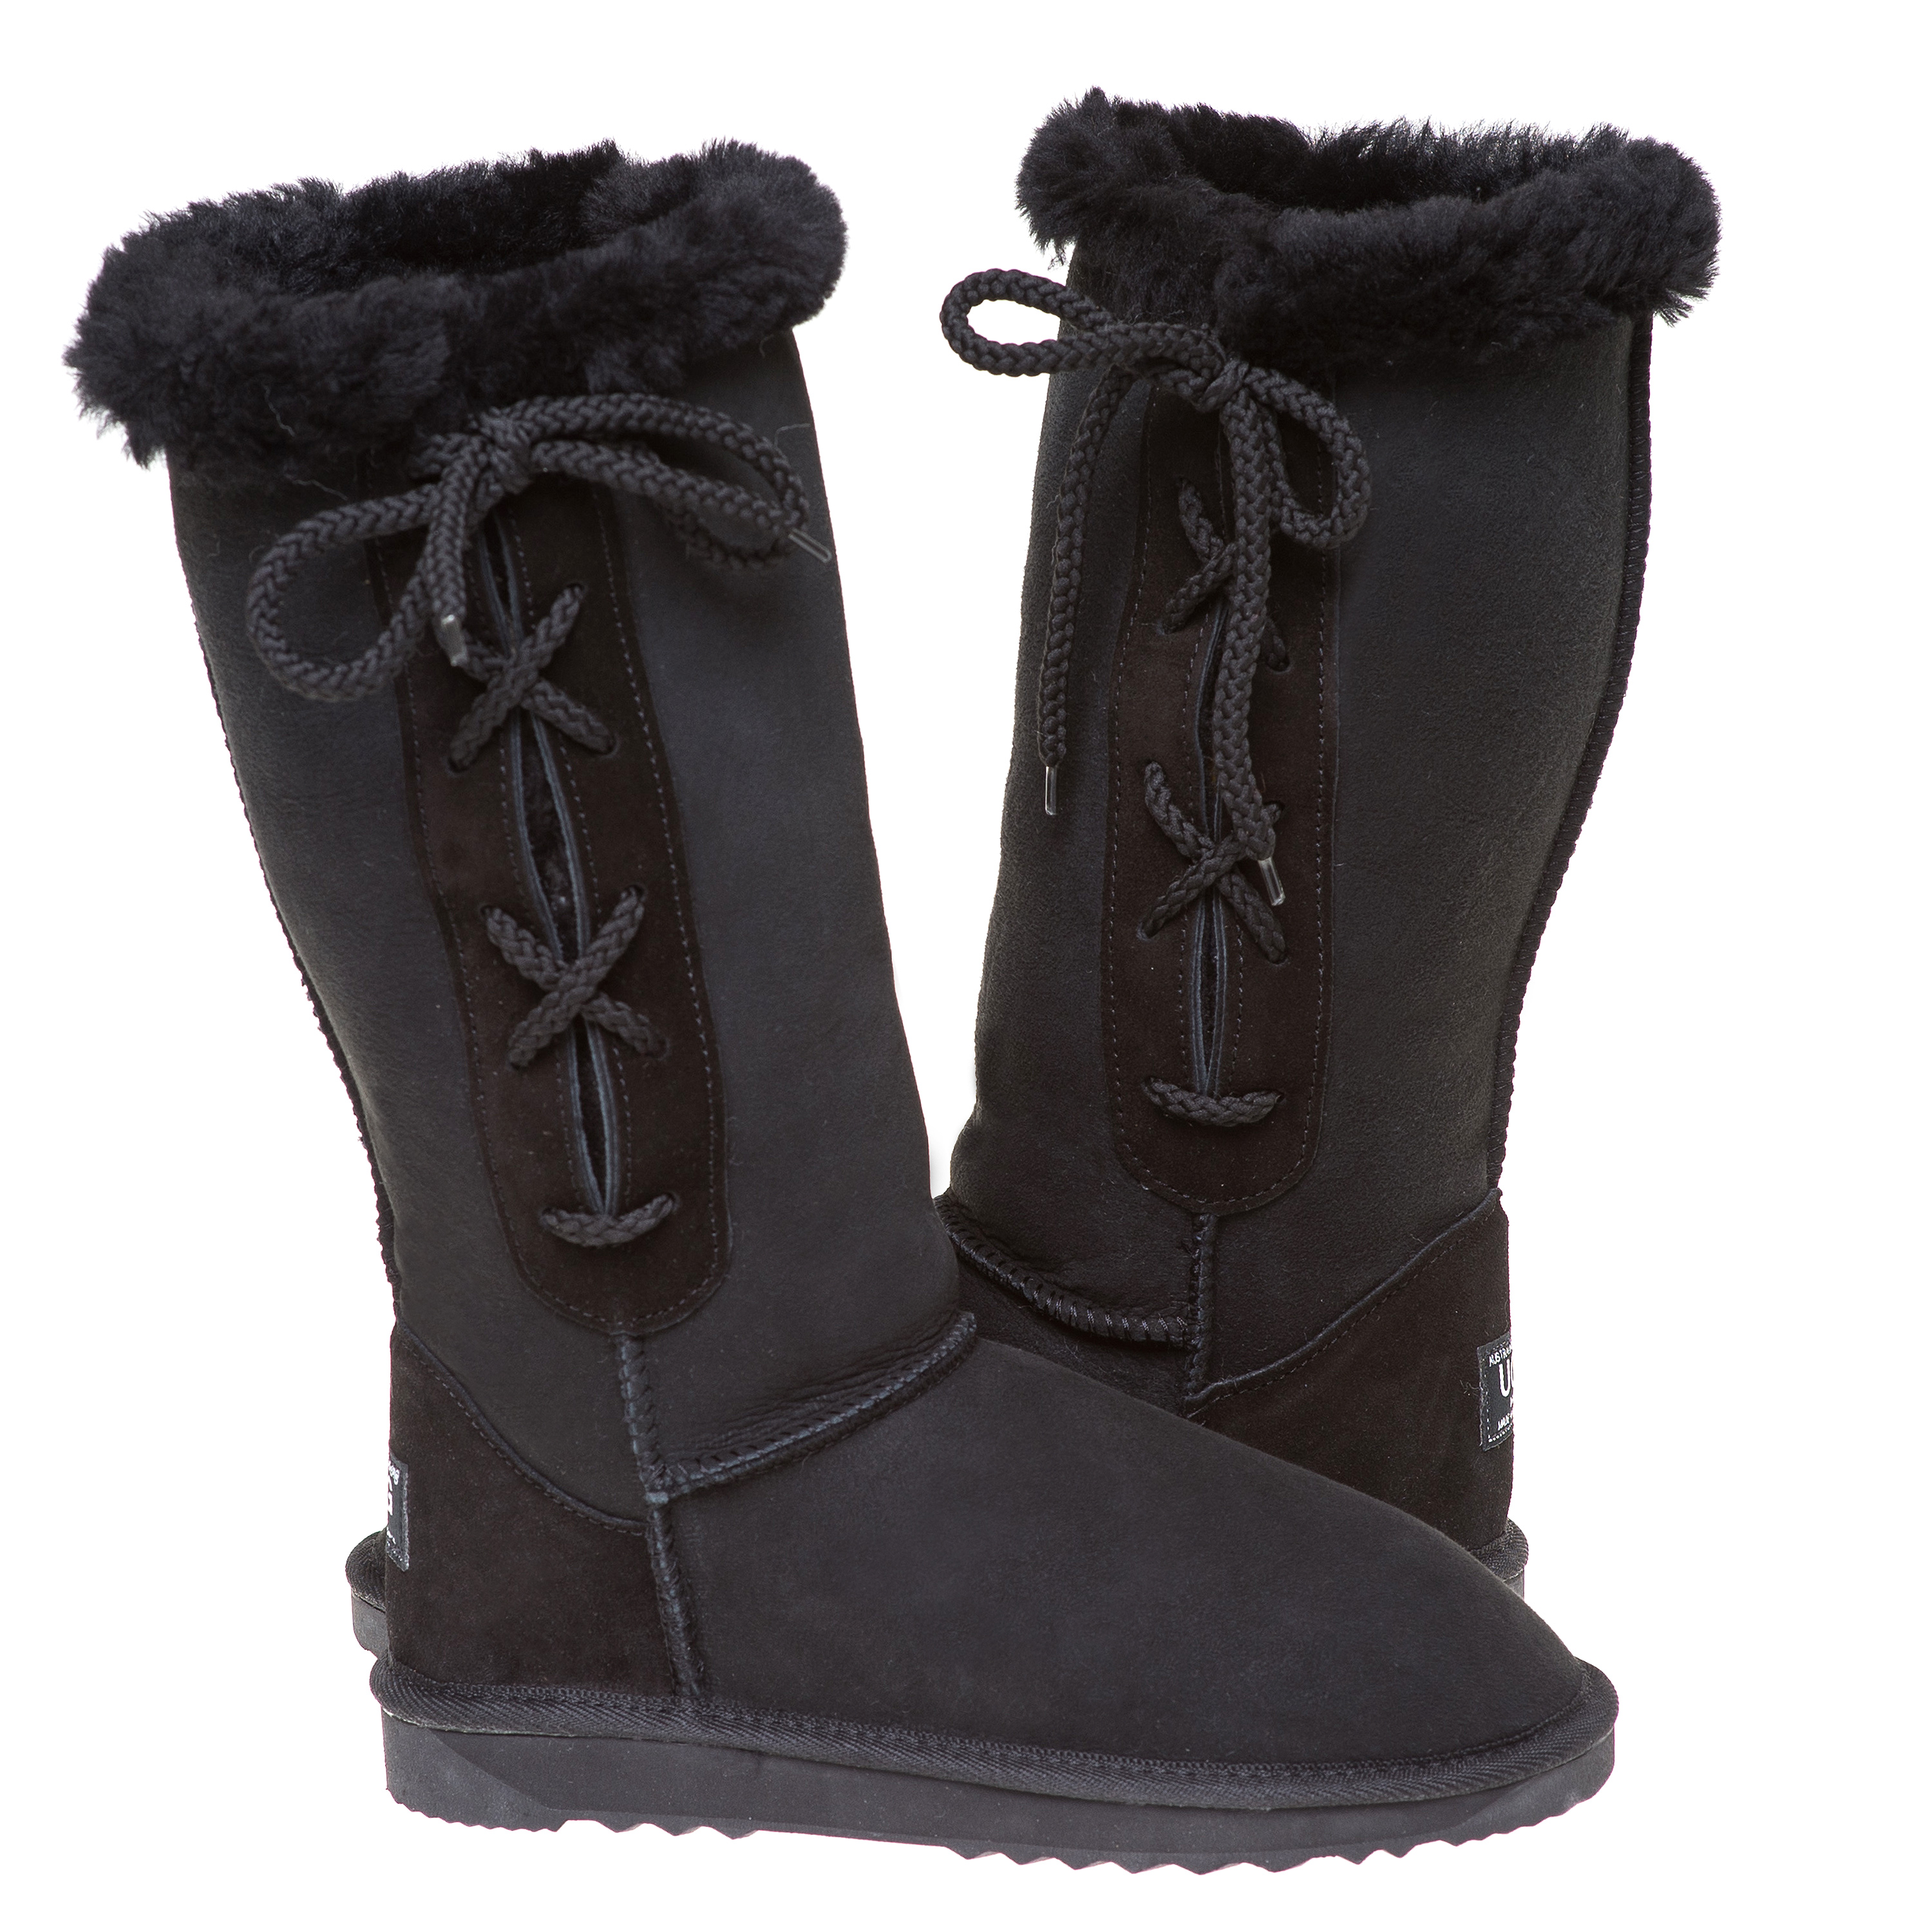 Lace-up/Unisex Ugg boots - Australian Leather - Australian Made Ugg Boots